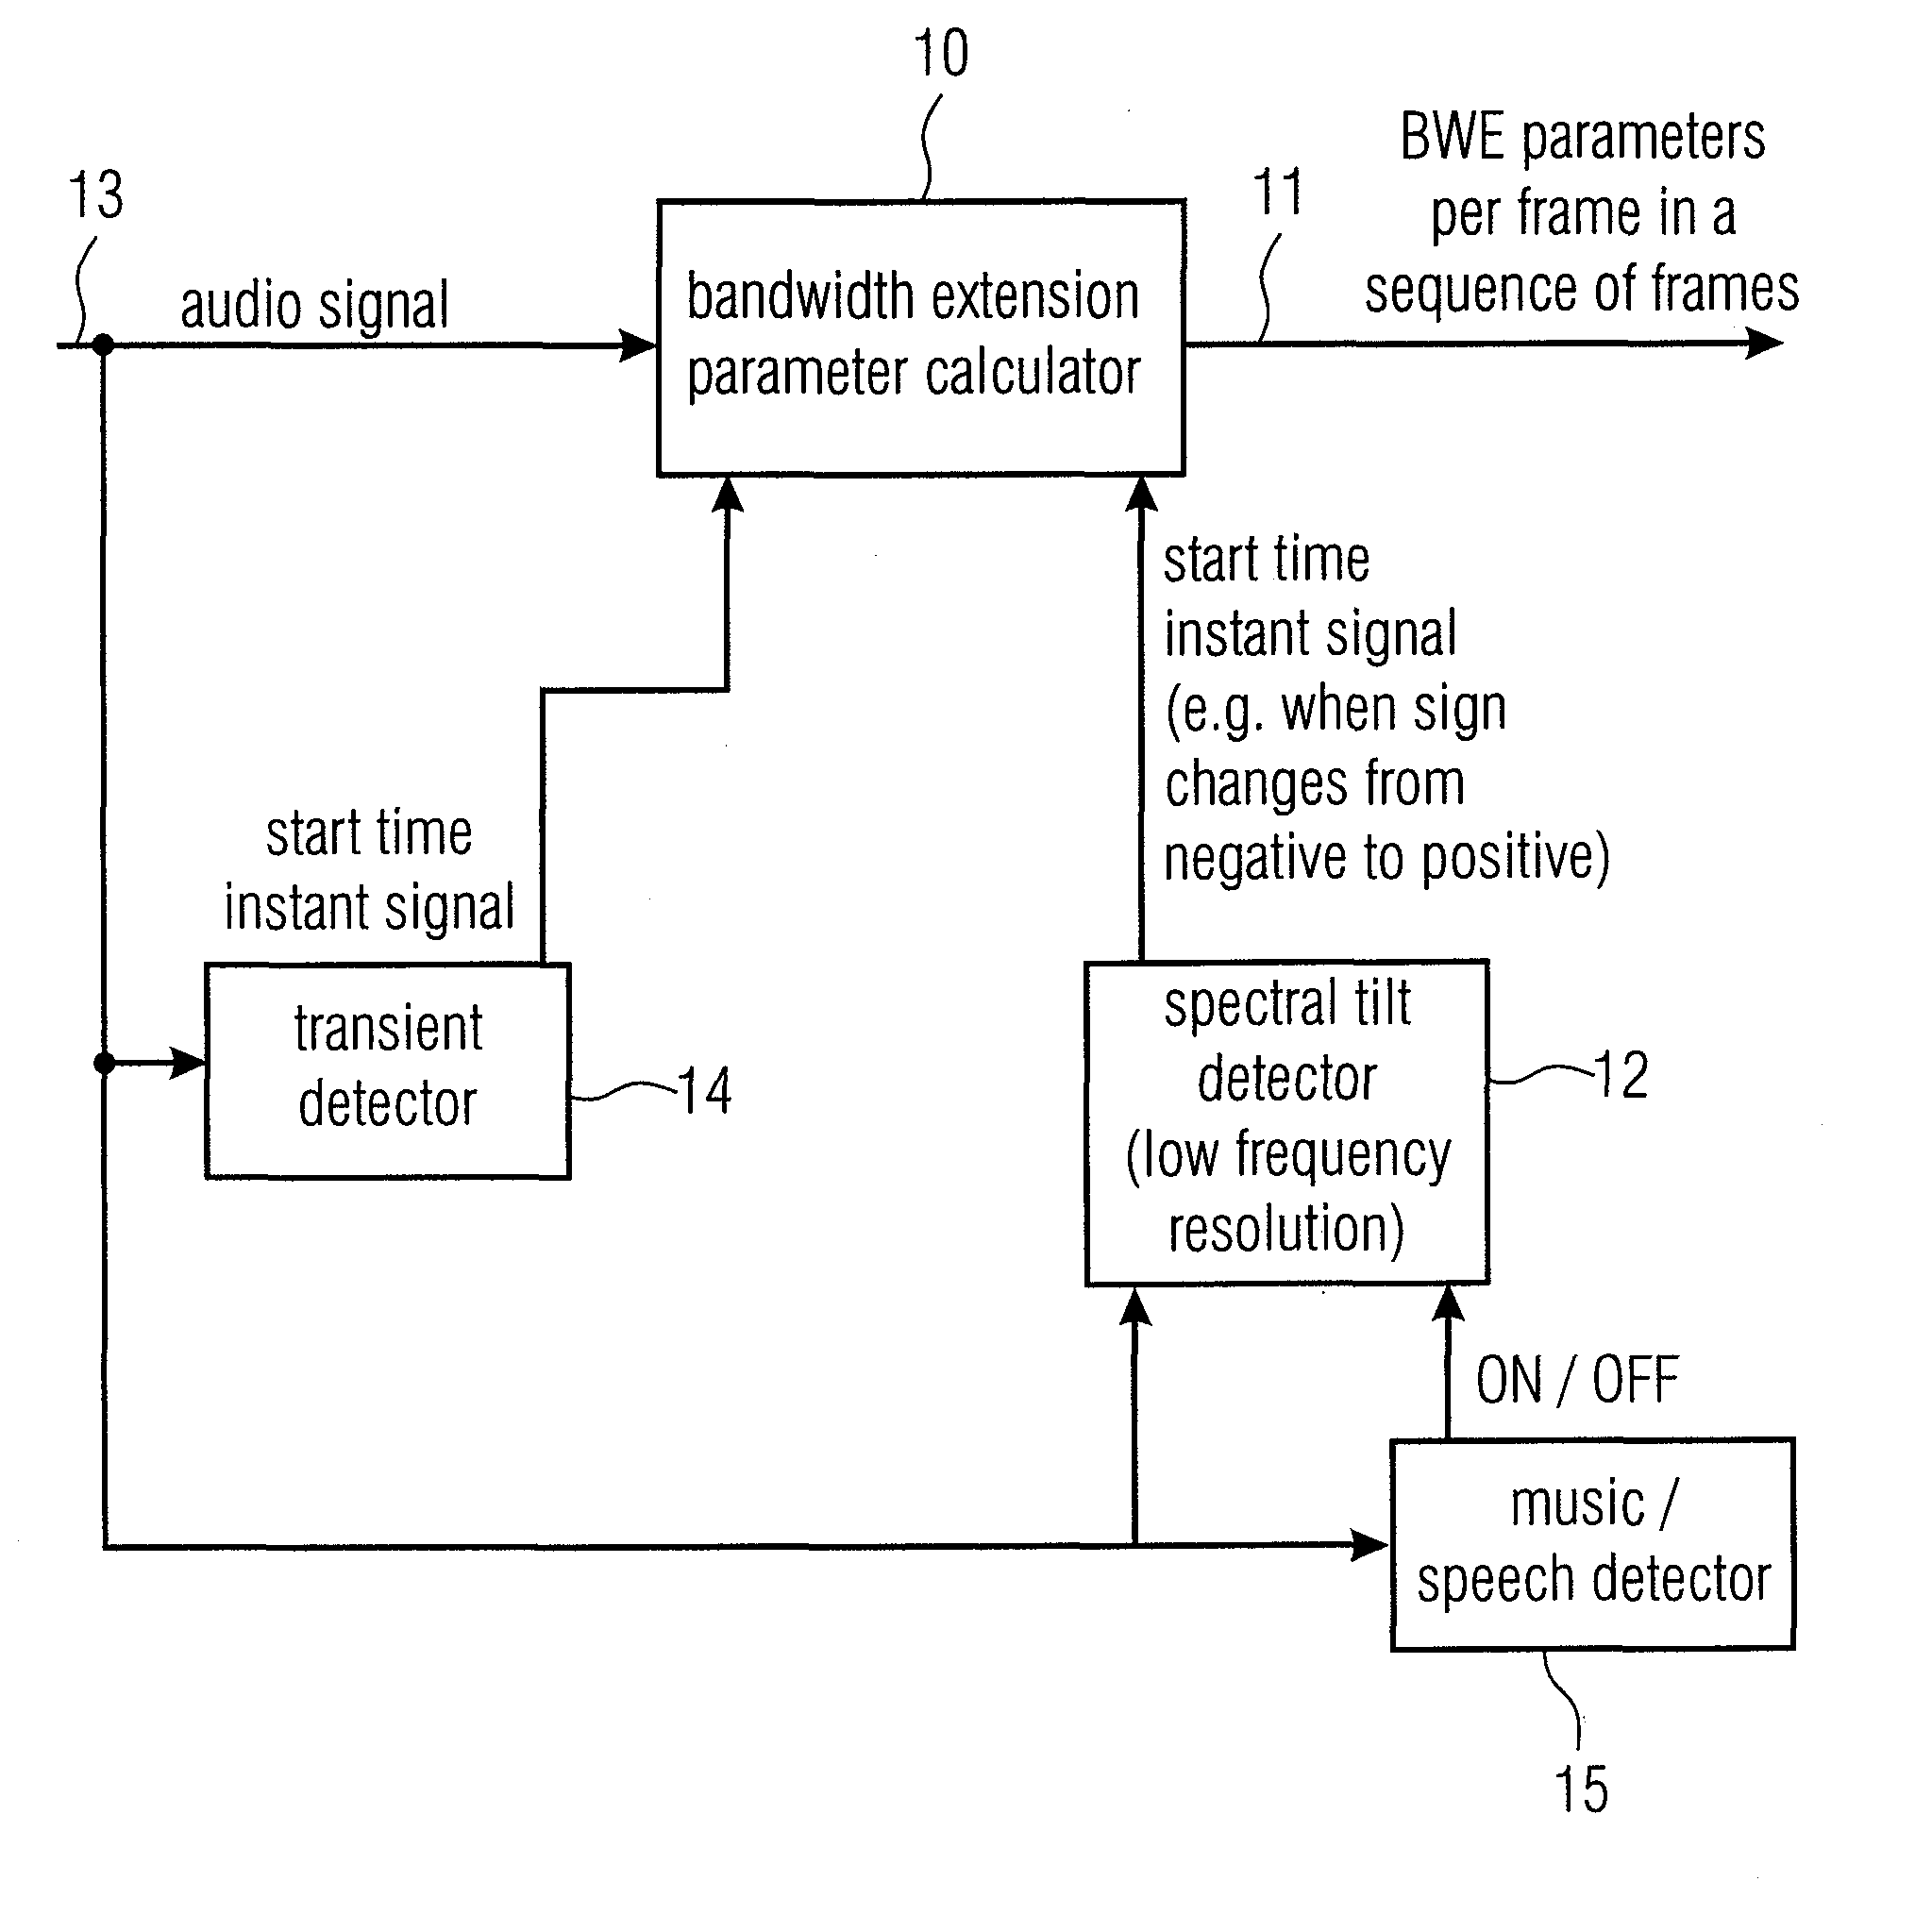 Apparatus and method for calculating bandwidth extension data using a spectral tilt controlled framing